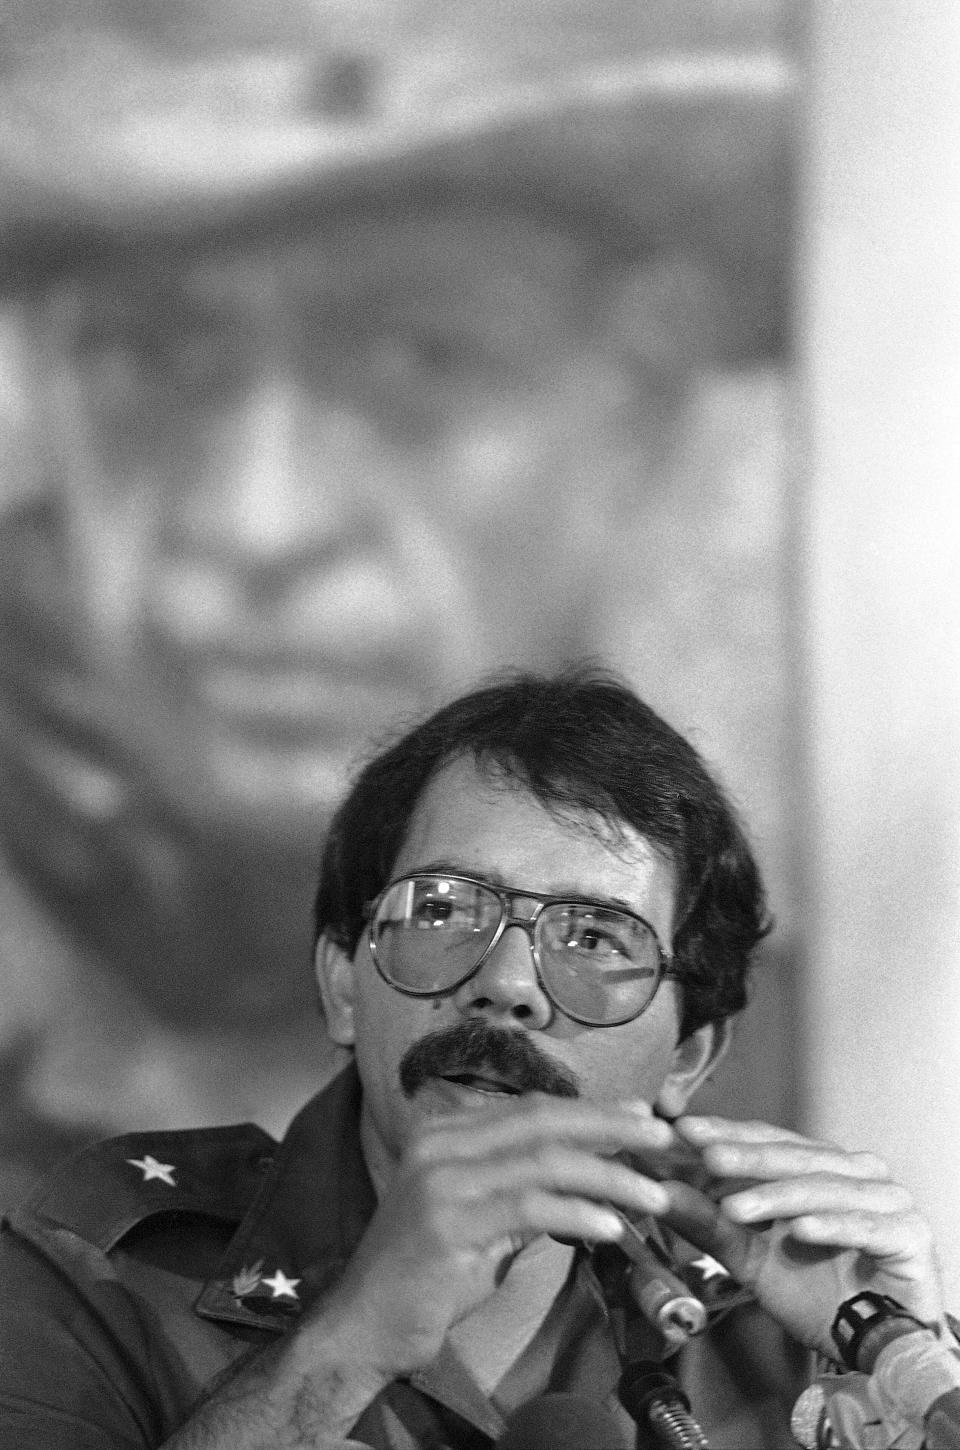 FILE - Sandinista presidential candidate Daniel Ortega answers a question, Nov. 5, 1984, during a news conference in Managua, Nicaragua. Ortega claimed victory during the conference. Pat Hamilton, a combat veteran of the Vietnam War who covered the civil wars in Central America as a photojournalist for The Associated Press, and who later worked at Reuters covering the Gulf War in Iraq, died Sunday, Aug. 13, 2023, after a long struggle with cancer. He was 74. (AP Photo/Pat Hamilton, File)